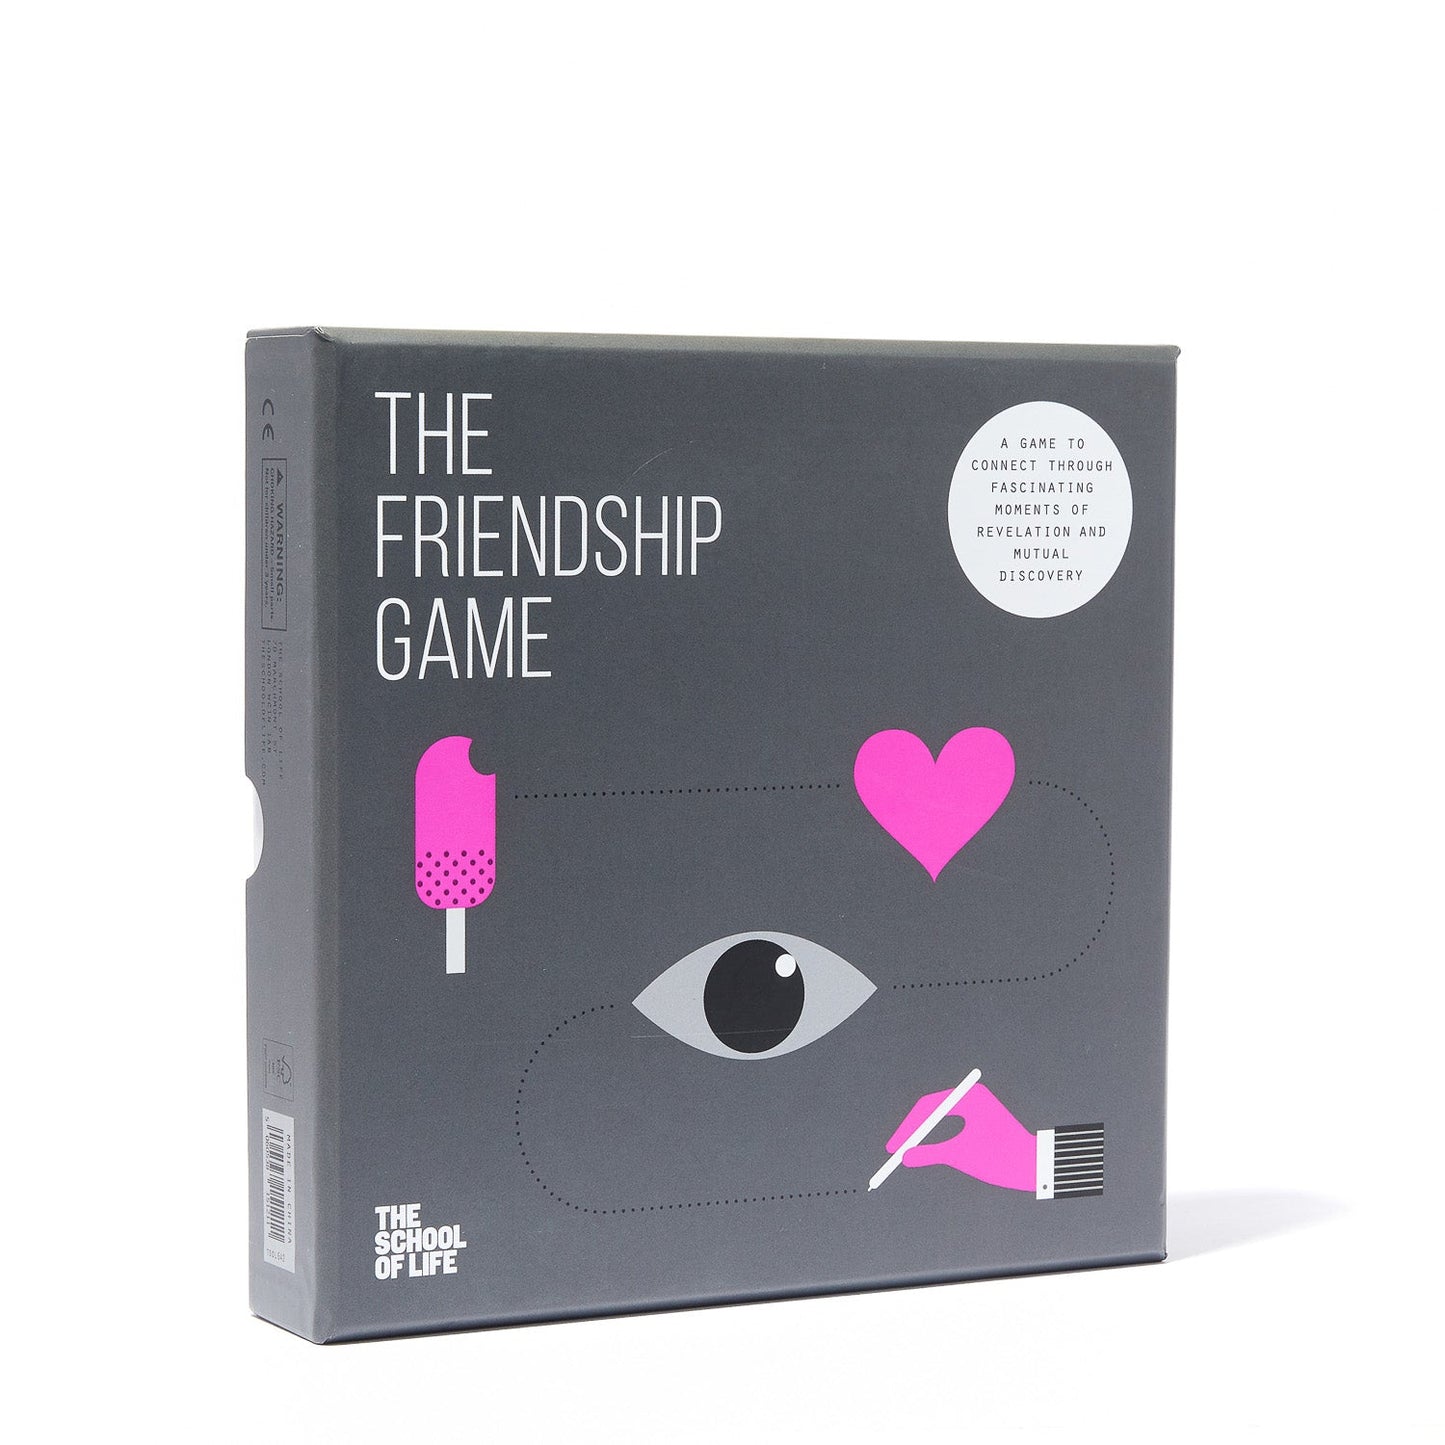 THE FRIENDSHIP GAME